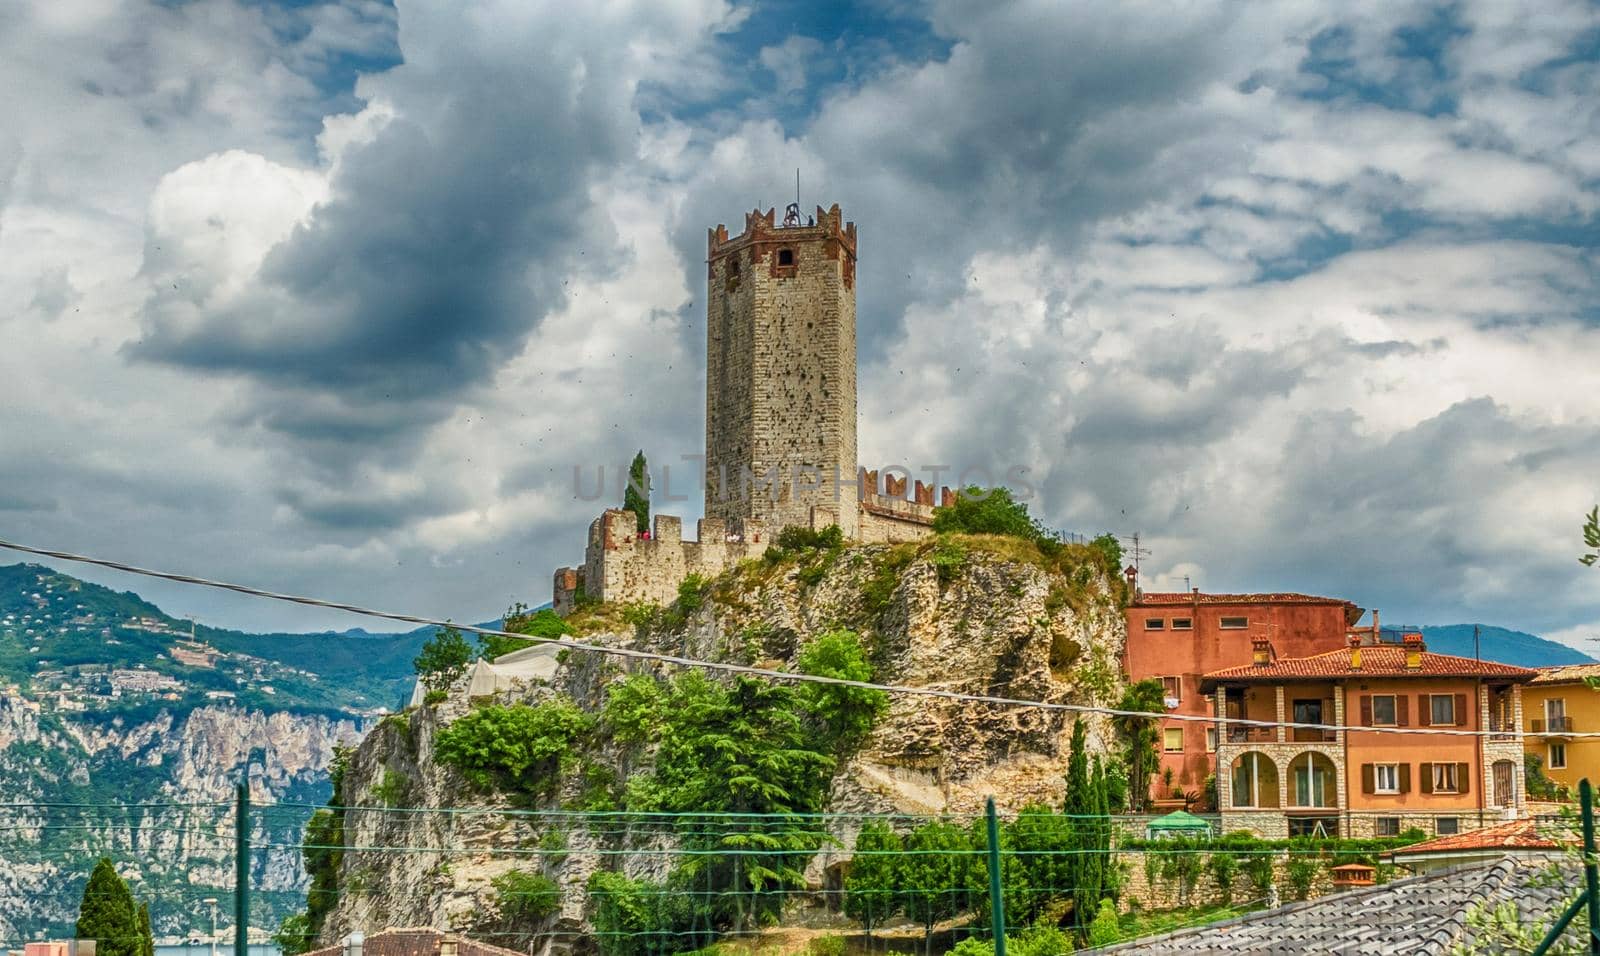 The medieval tower of Malcesine Castle, iconic landmark on the Lake Garda, Italy